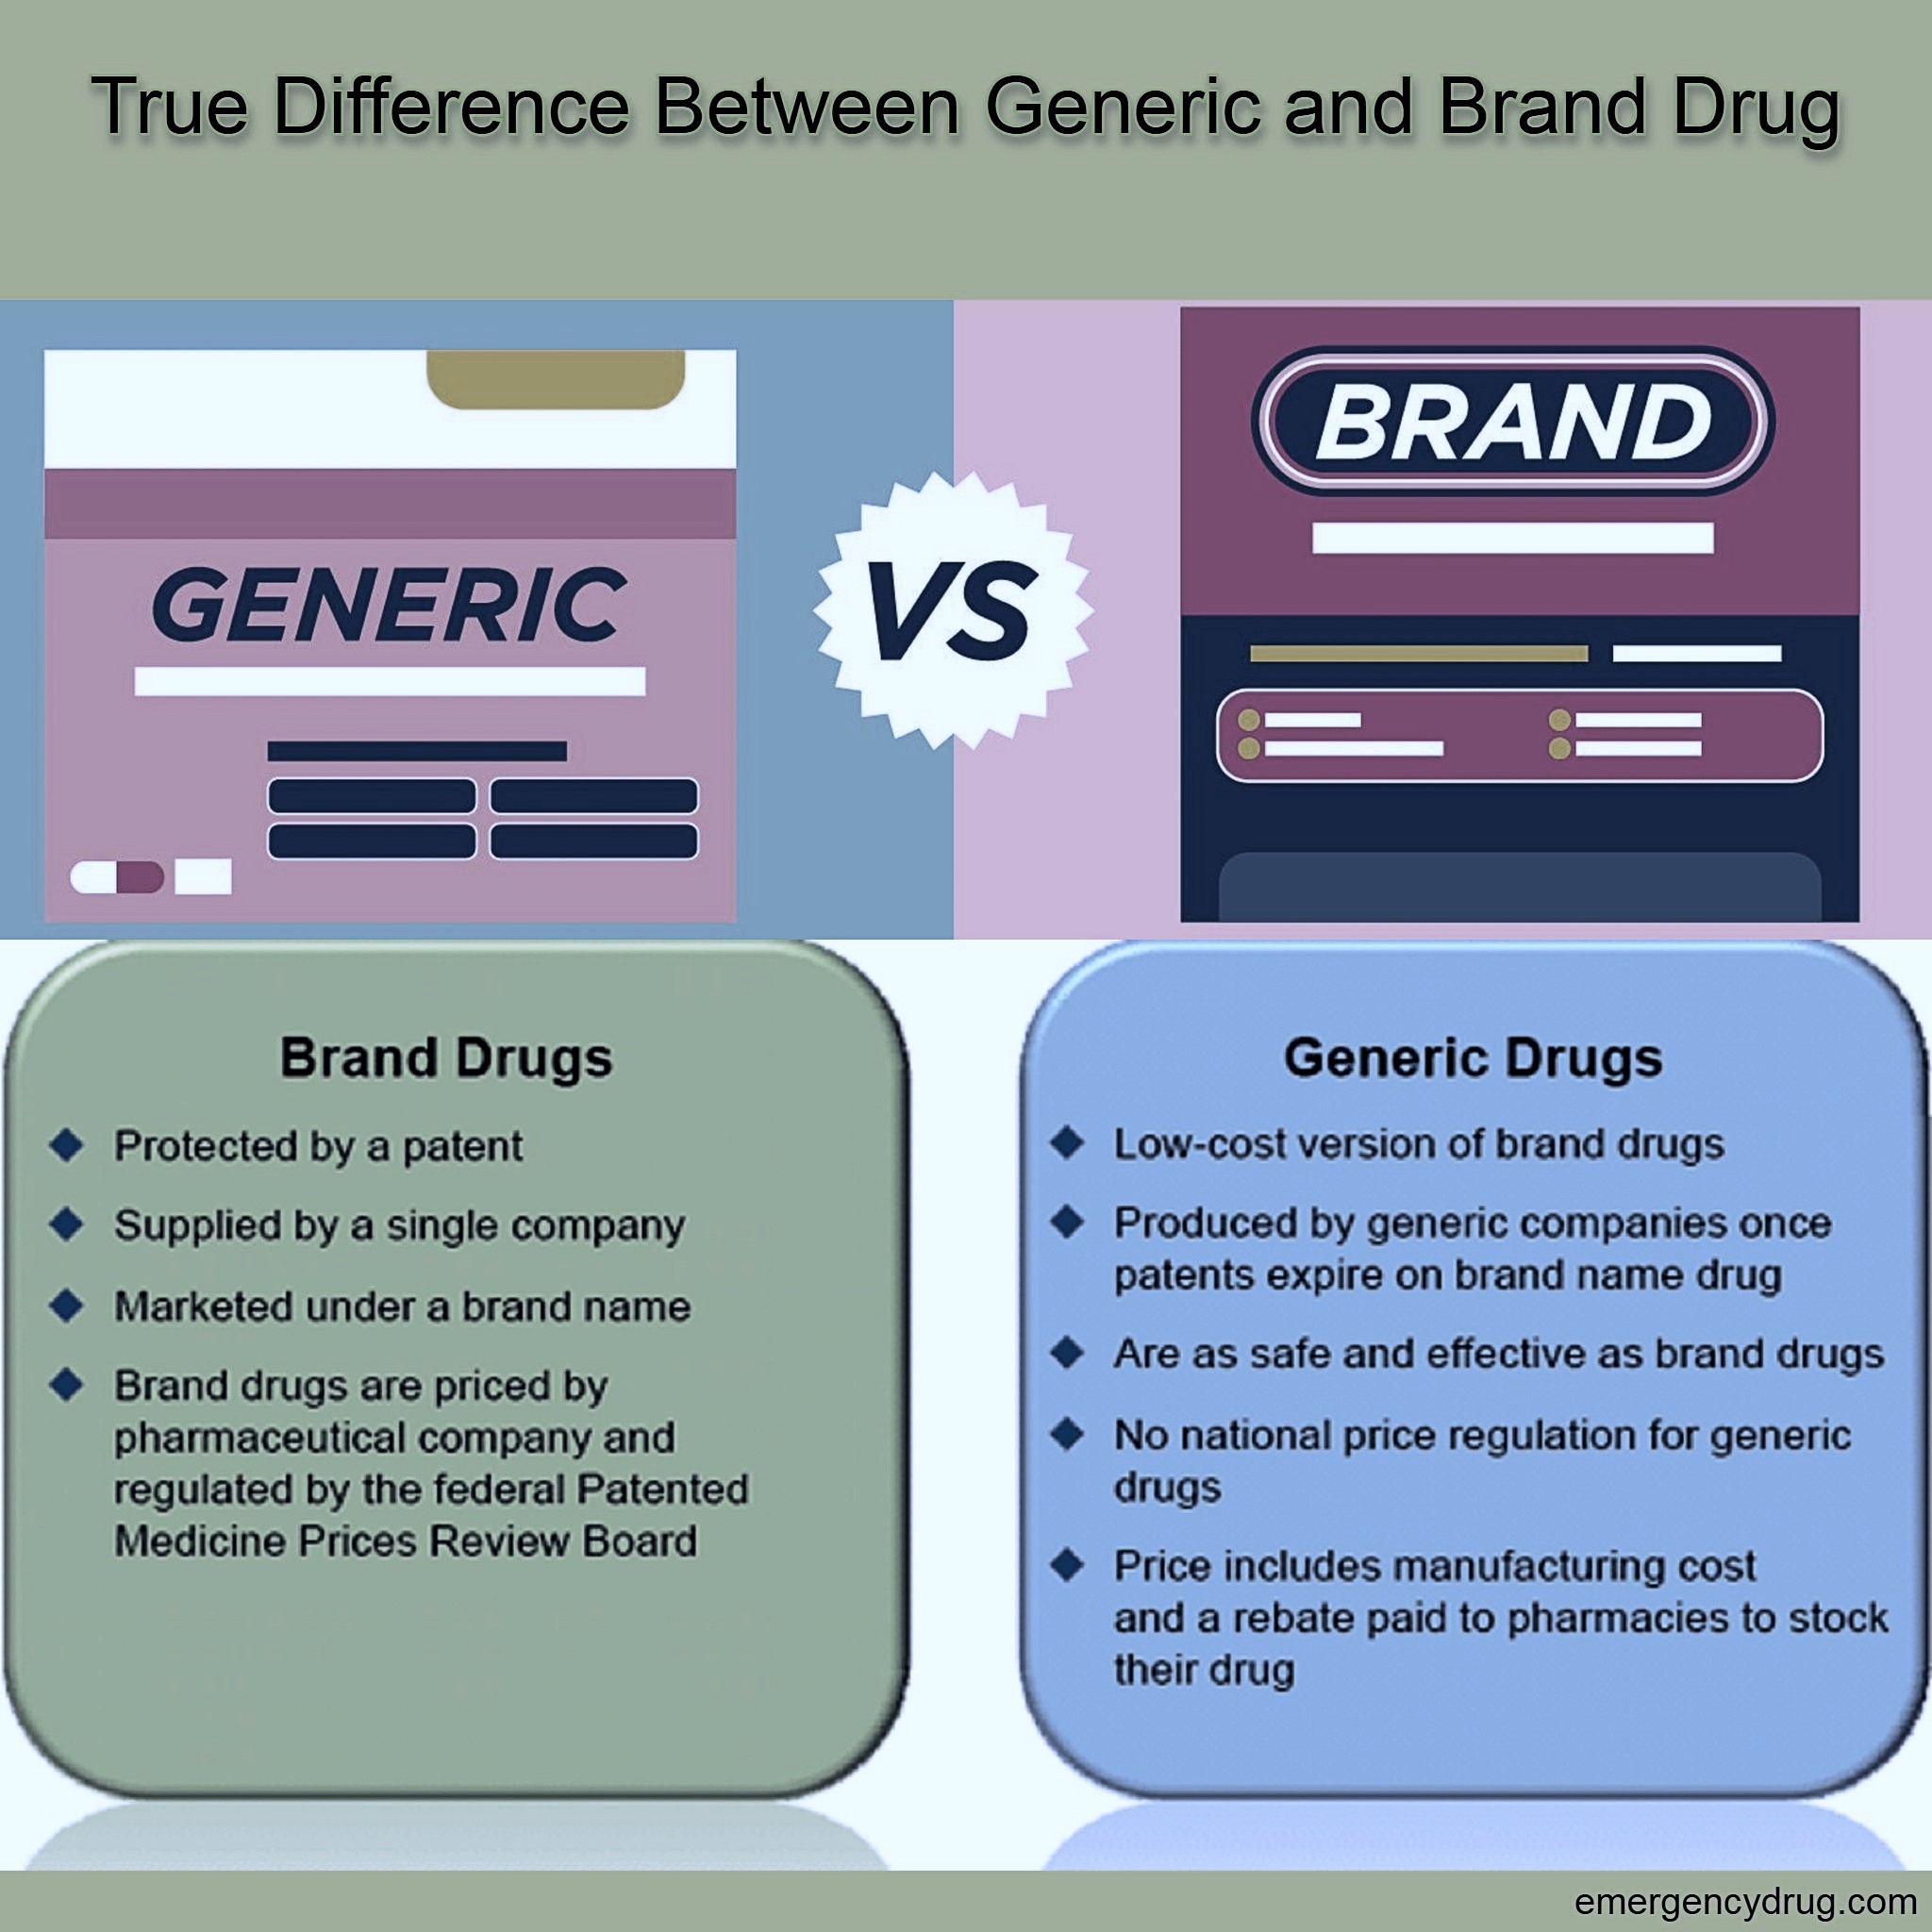 True Difference Between Generic and Brand Drug